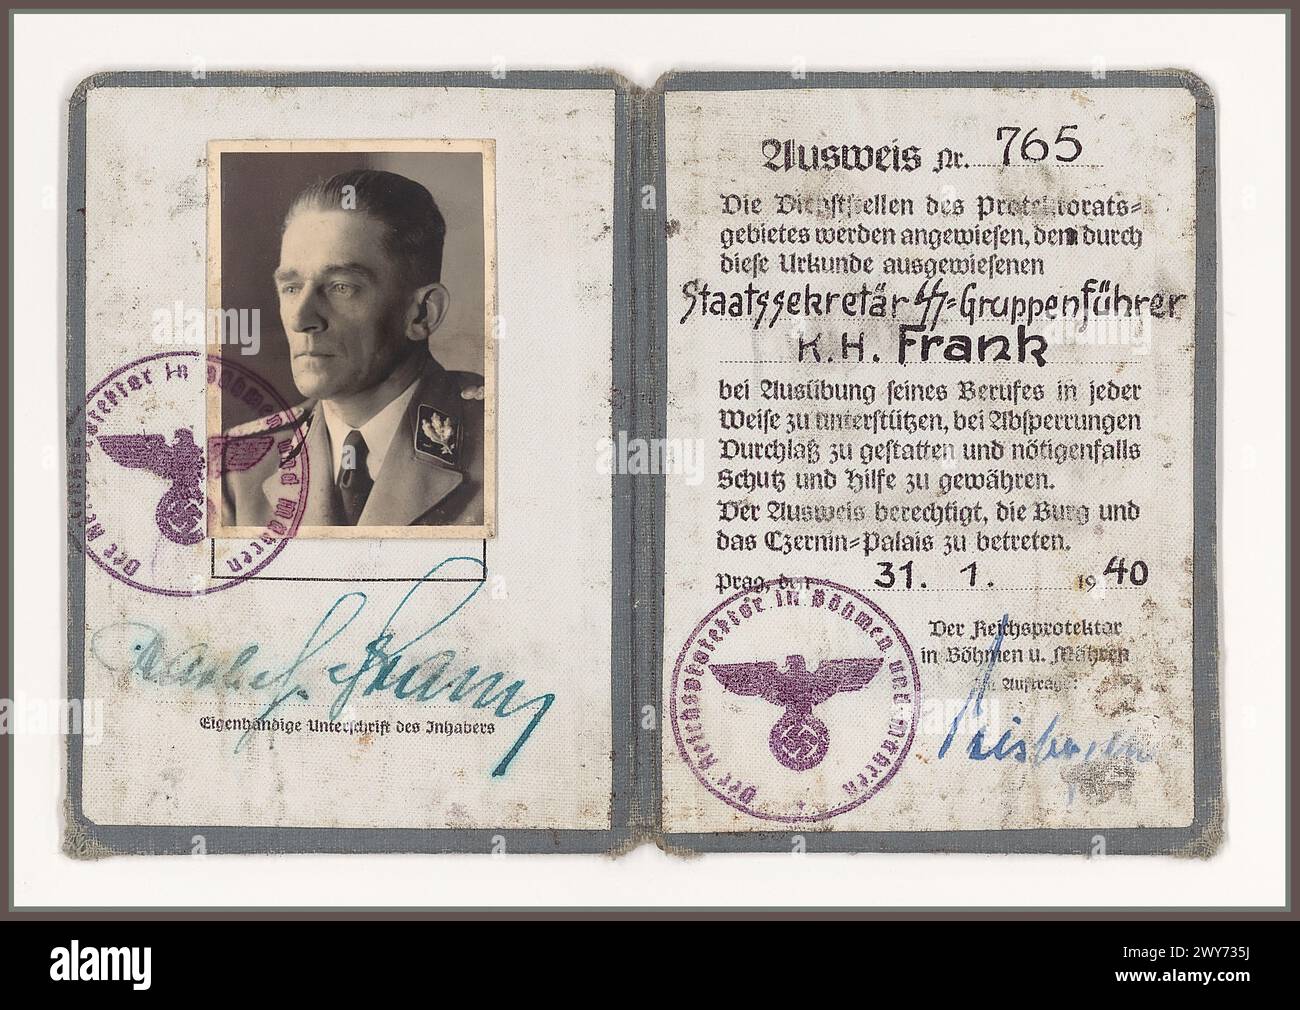 Nazi Ausweis Identity Document for K. H. Frank from 31.1.1940 still as SS-Gruppenführer and state secretary at the Reich Protector for Bohemia and Moravia, later SS-Obergruppenführer and state minister for Bohemia and Moravia. Part of the file from the trial of K. H. Frank at the Extraordinary People's Court in Prague. Extraordinary People's Court Prague, K.H. Frank, After the war, he was tried, convicted and executed by hanging for his role in organizing the massacres of the people of the Czech villages of Lidice and Ležáky. Stock Photo